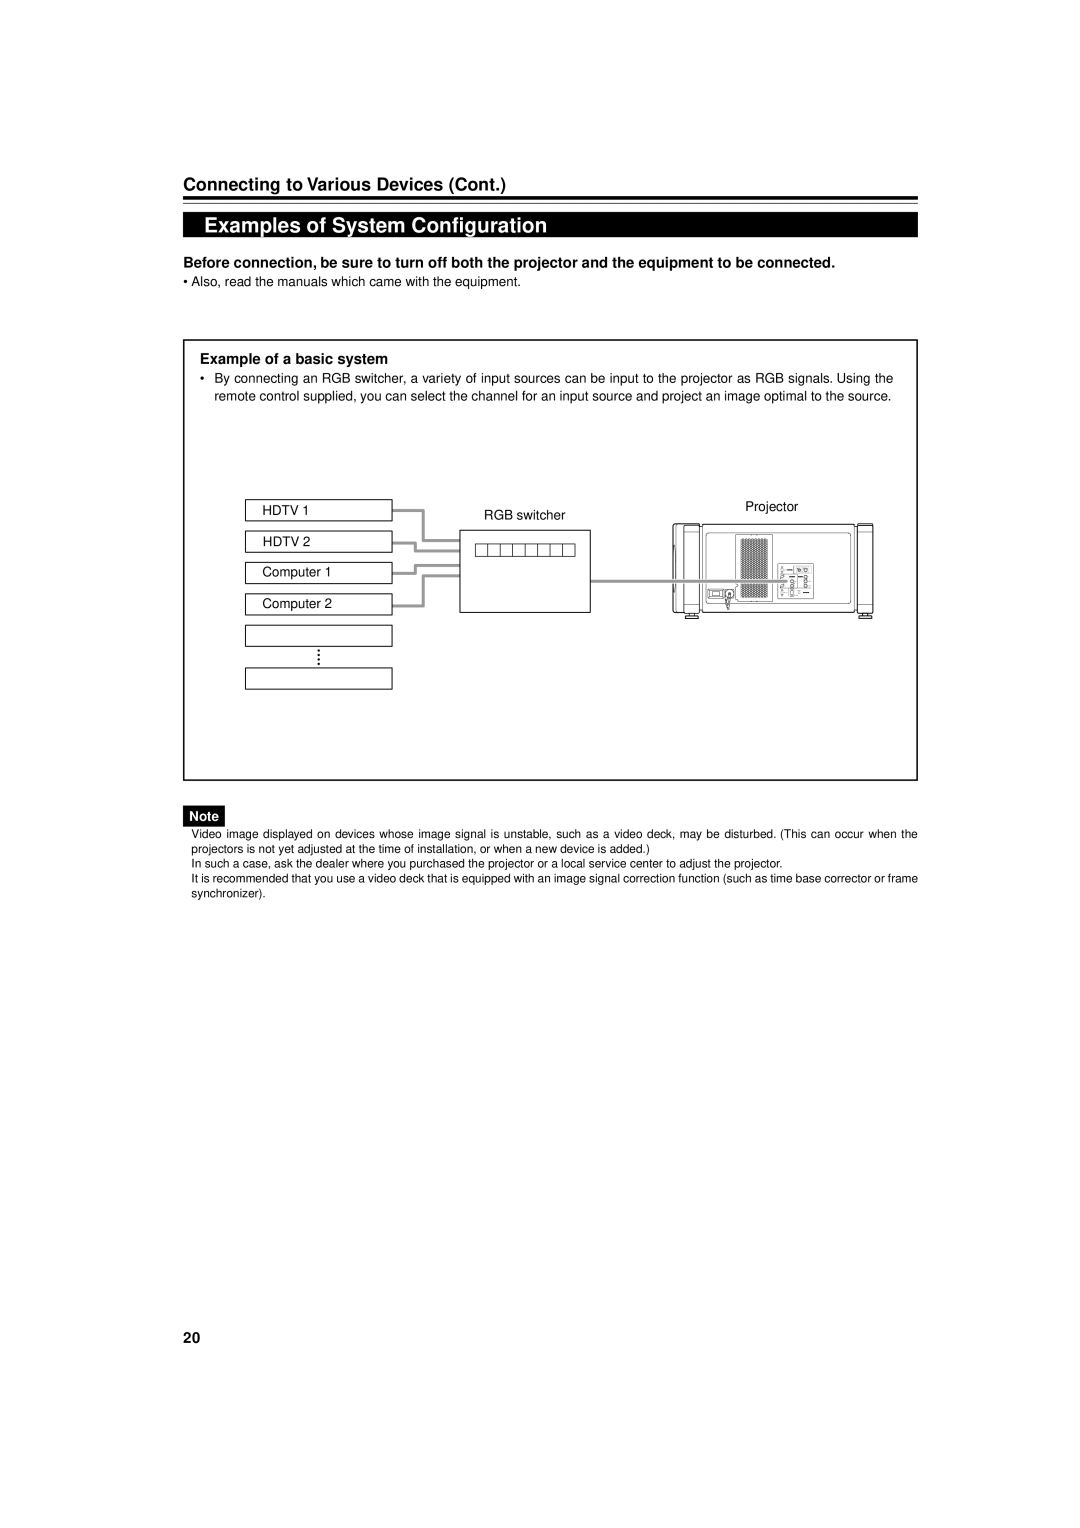 JVC DLA-M5000SCU manual Examples of System Configuration, Connecting to Various Devices Cont, Example of a basic system 